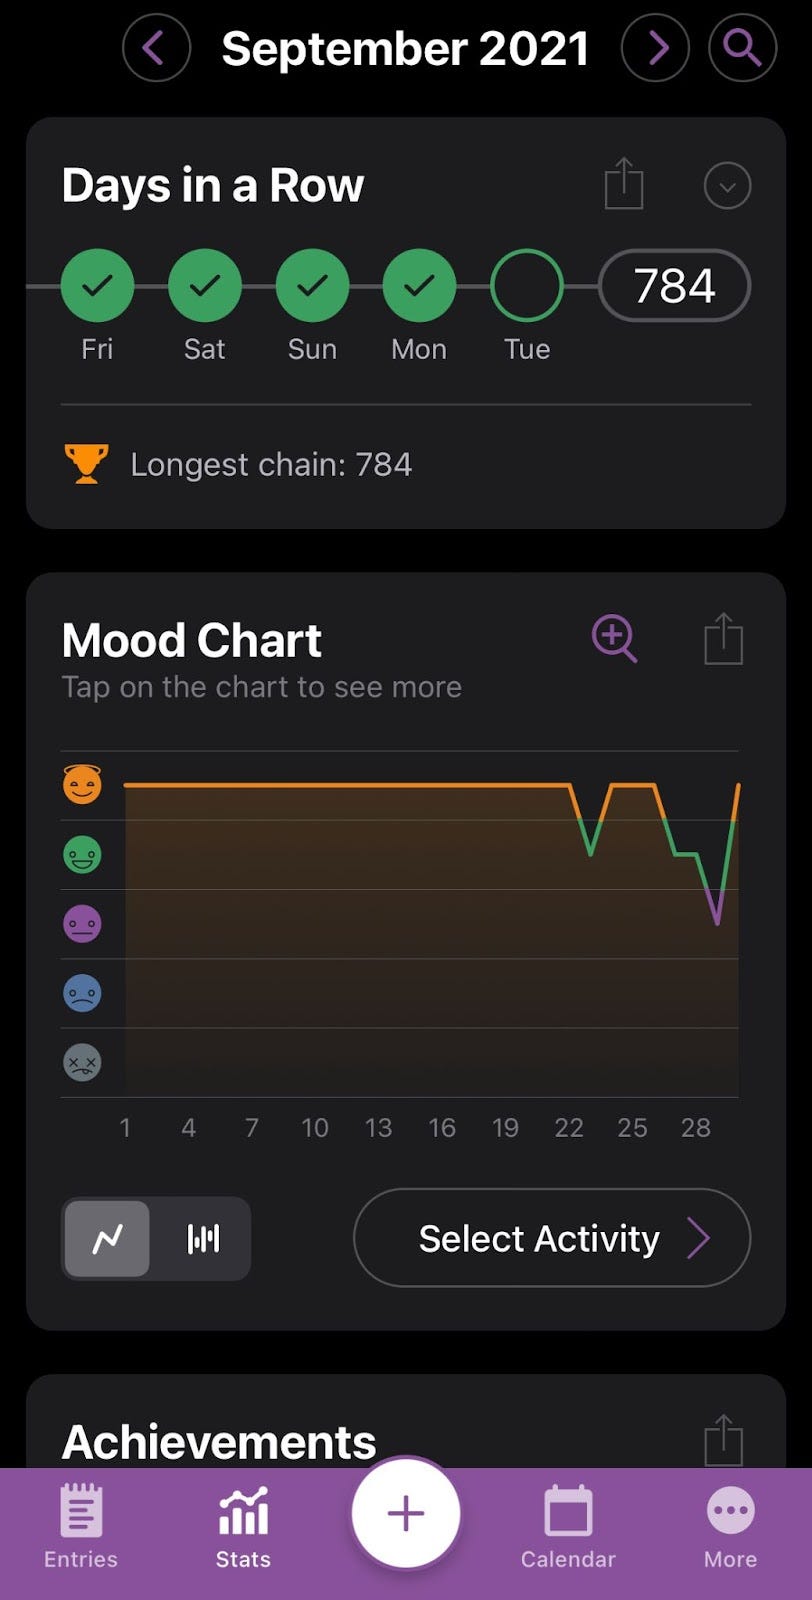 View of mood chart